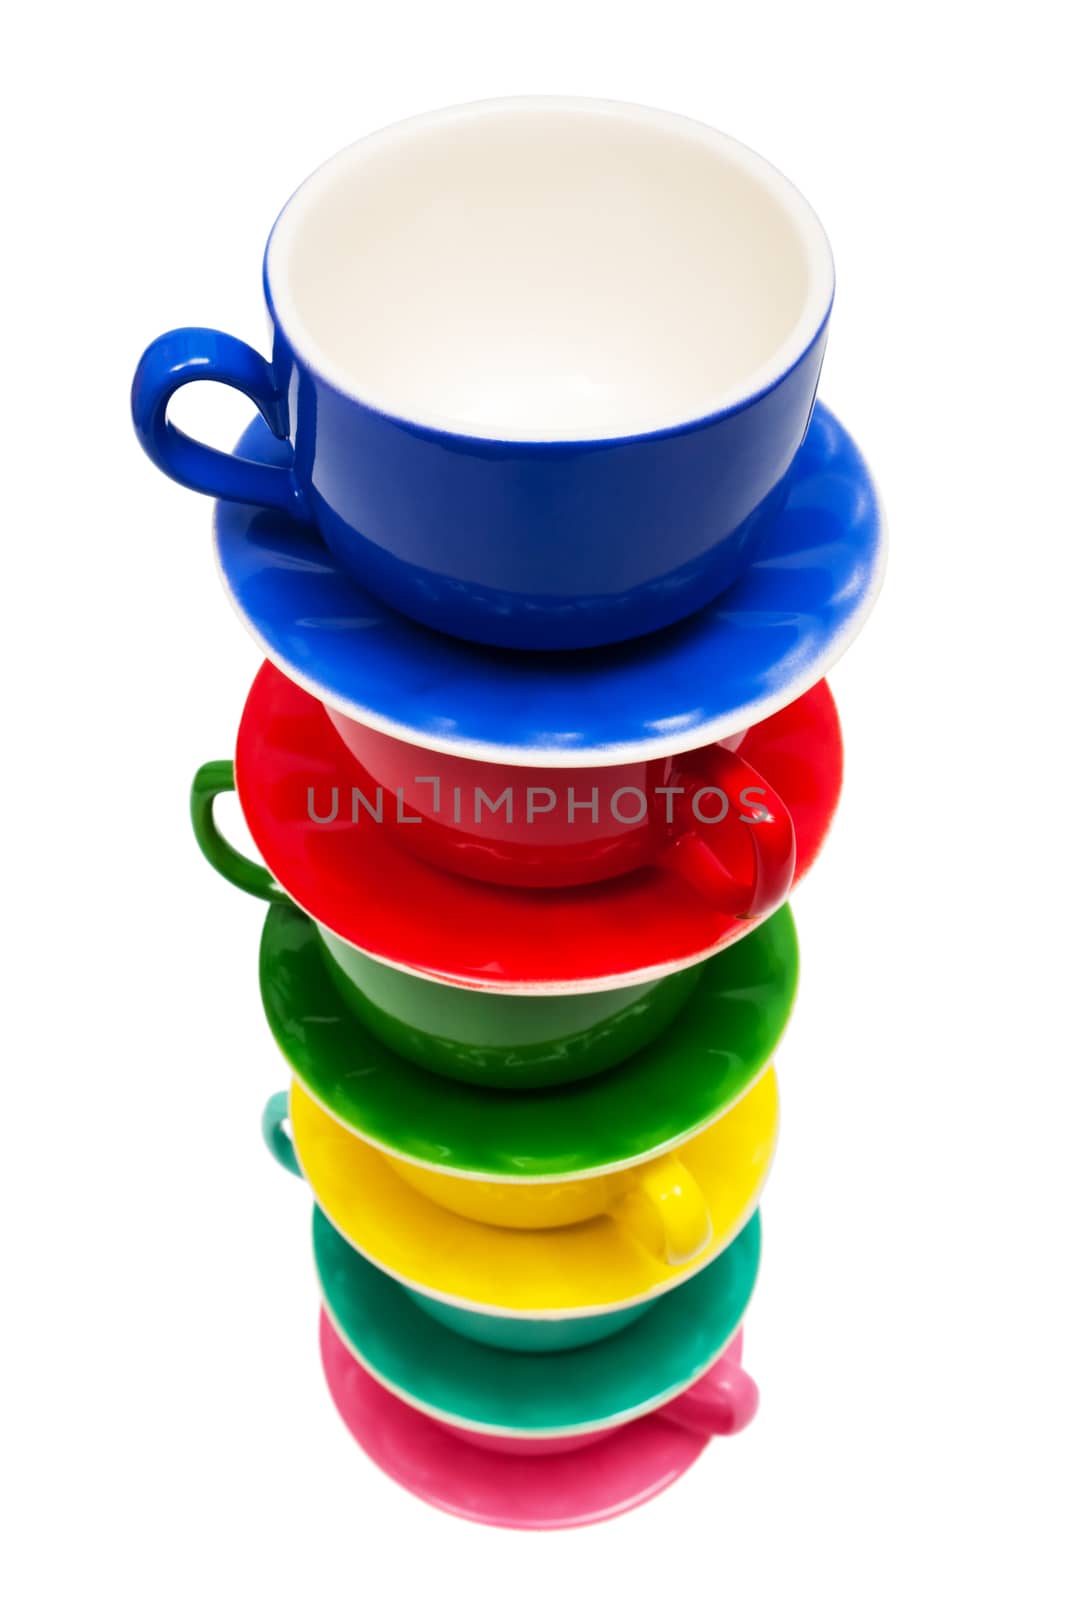 color cups by terex